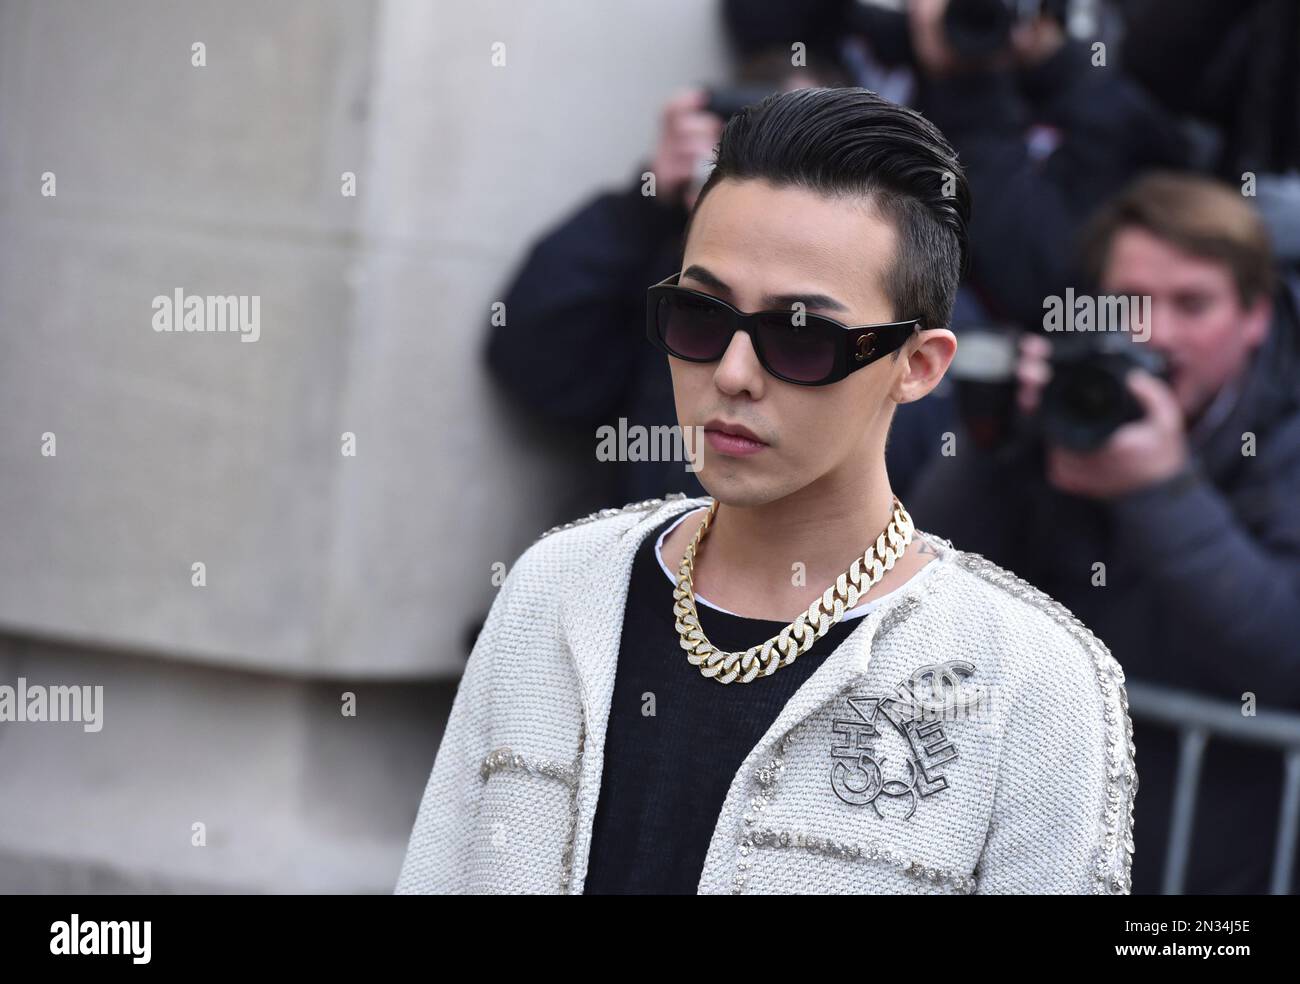 South Korean rapper Kwon Ji Yong, better known by his stage name G-Dragon,  leaves Chanel 's Spring-Summer 2015 Haute Couture fashion collection,  presented in Paris, France, Tuesday, Jan. 27, 2015. (AP Photo/Zacharie